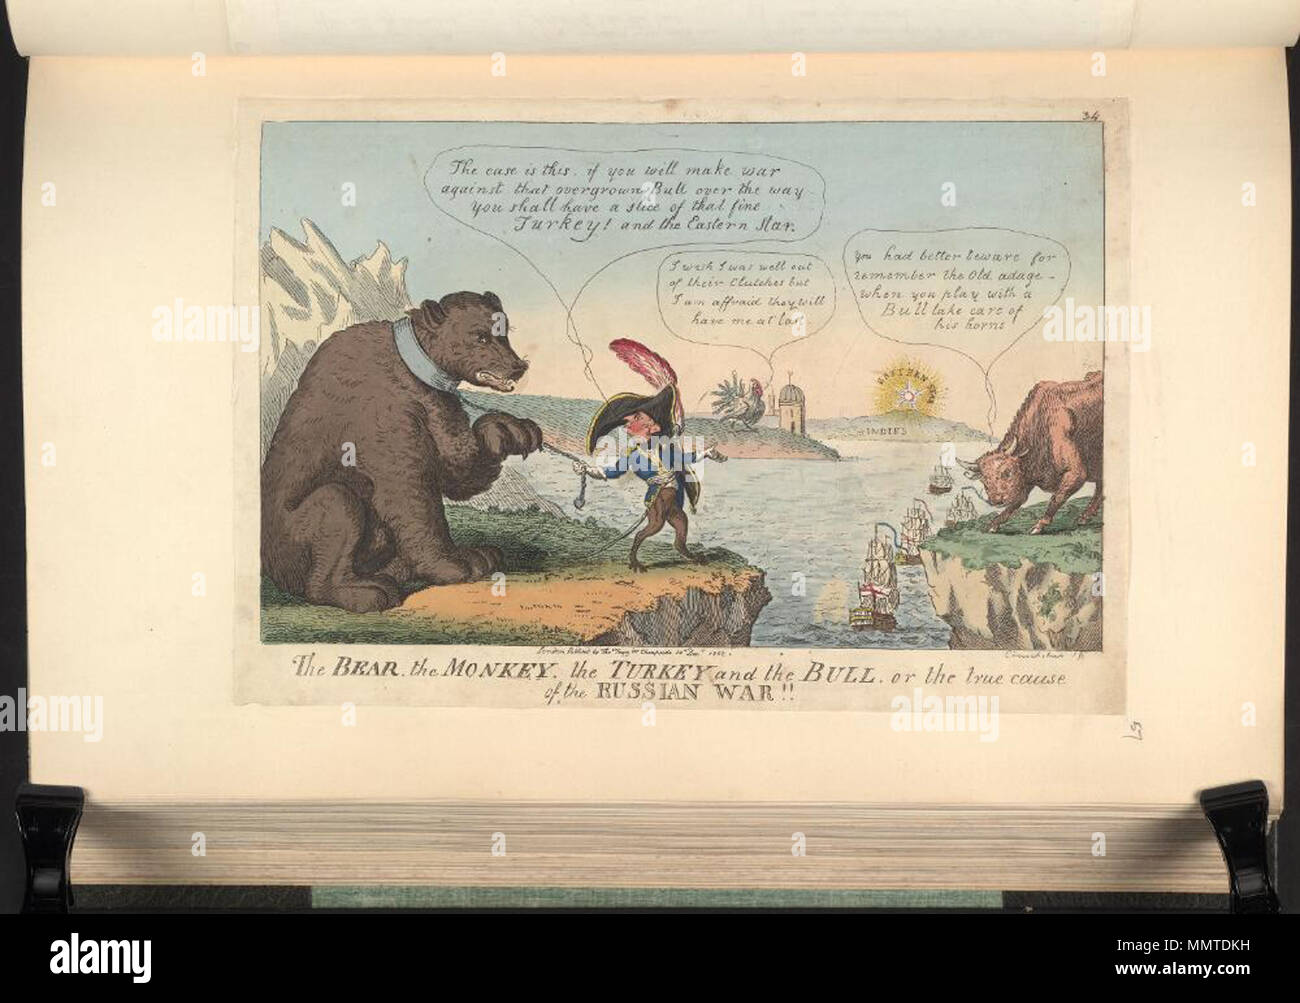 . Satire on the Napoleonic wars. (British political cartoon); A satire on the Treaty of Tilsit, between Tsar Alexander I and Napoleon. Napoleon, as a monkey, urges the Russian bear to make war on Britain.  The bear, the monkey, the turkey and the bull. or: the true cause of the Russian war!!. 20 December 1808. Bodleian Libraries, The bear, the monkey, the turkey and the bull or- the true cause of the Russian war Stock Photo